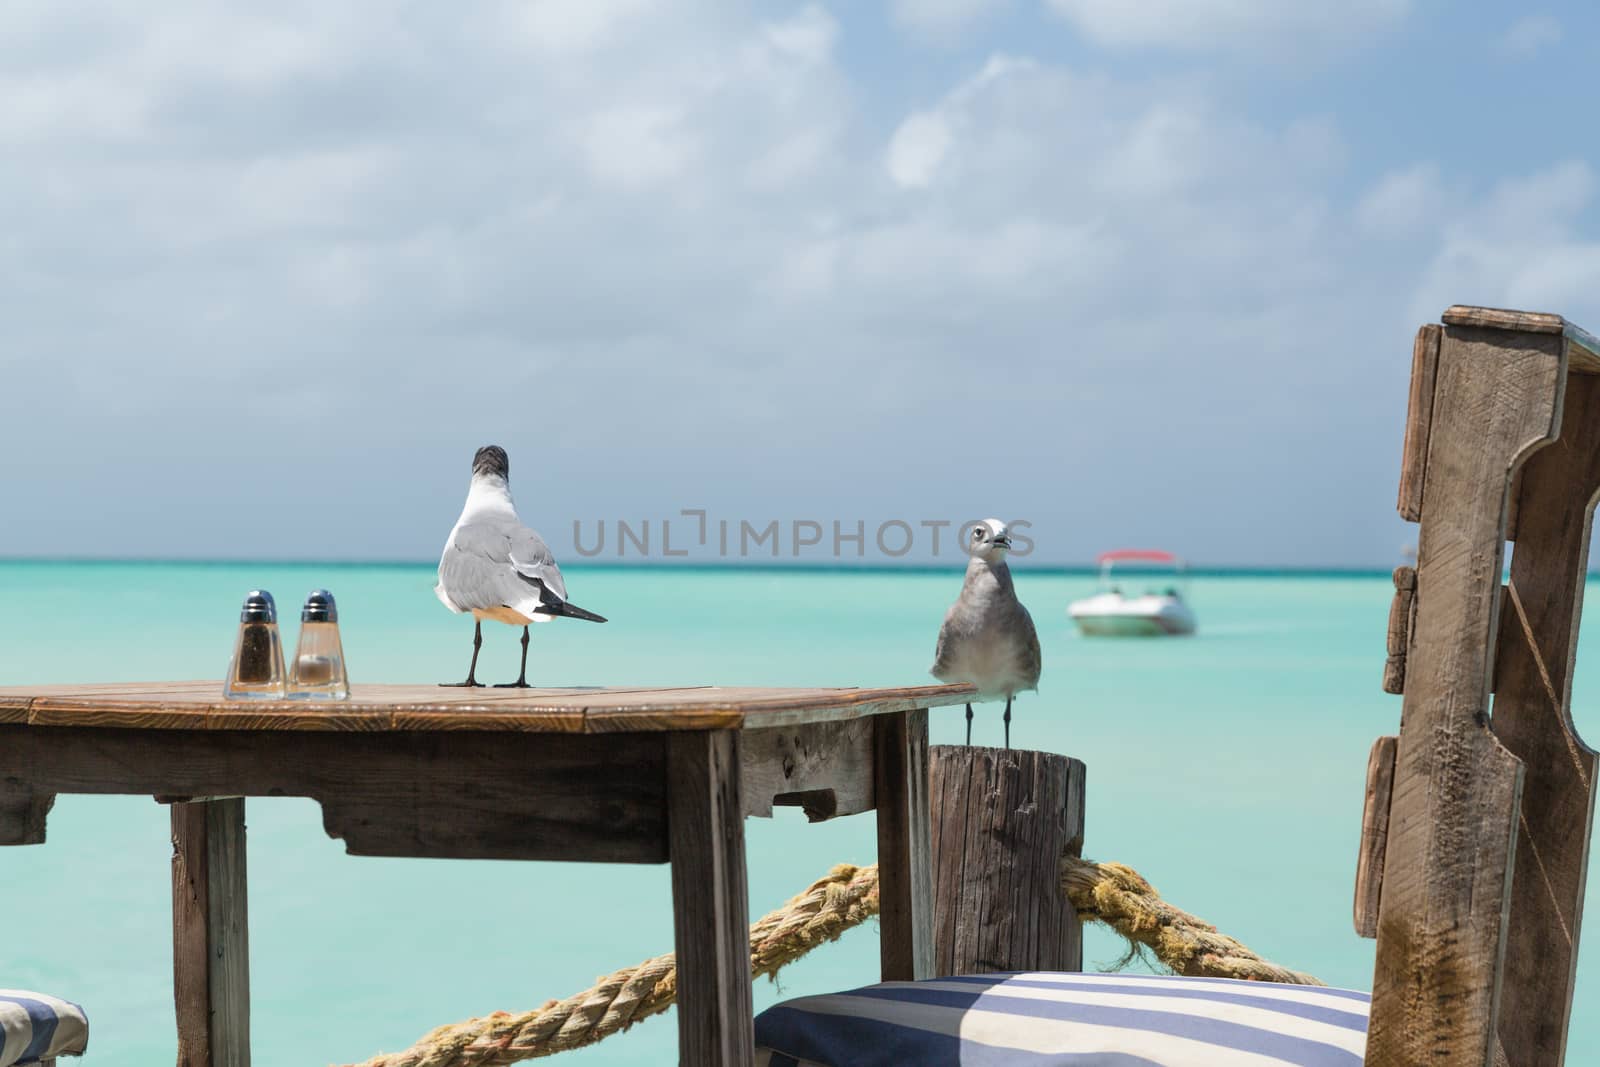 Seagulls in Aruba are ready for lunch by chrisukphoto